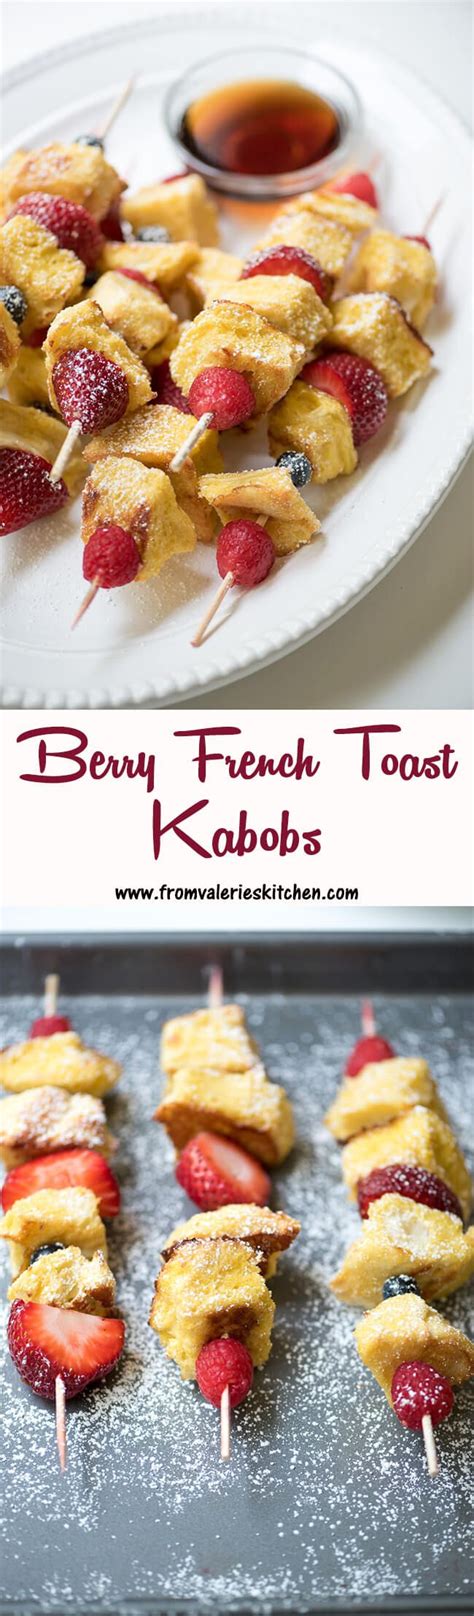 See more ideas about food, buffet, finger foods. Berry French Toast Kabobs - From Valerie's Kitchen ...